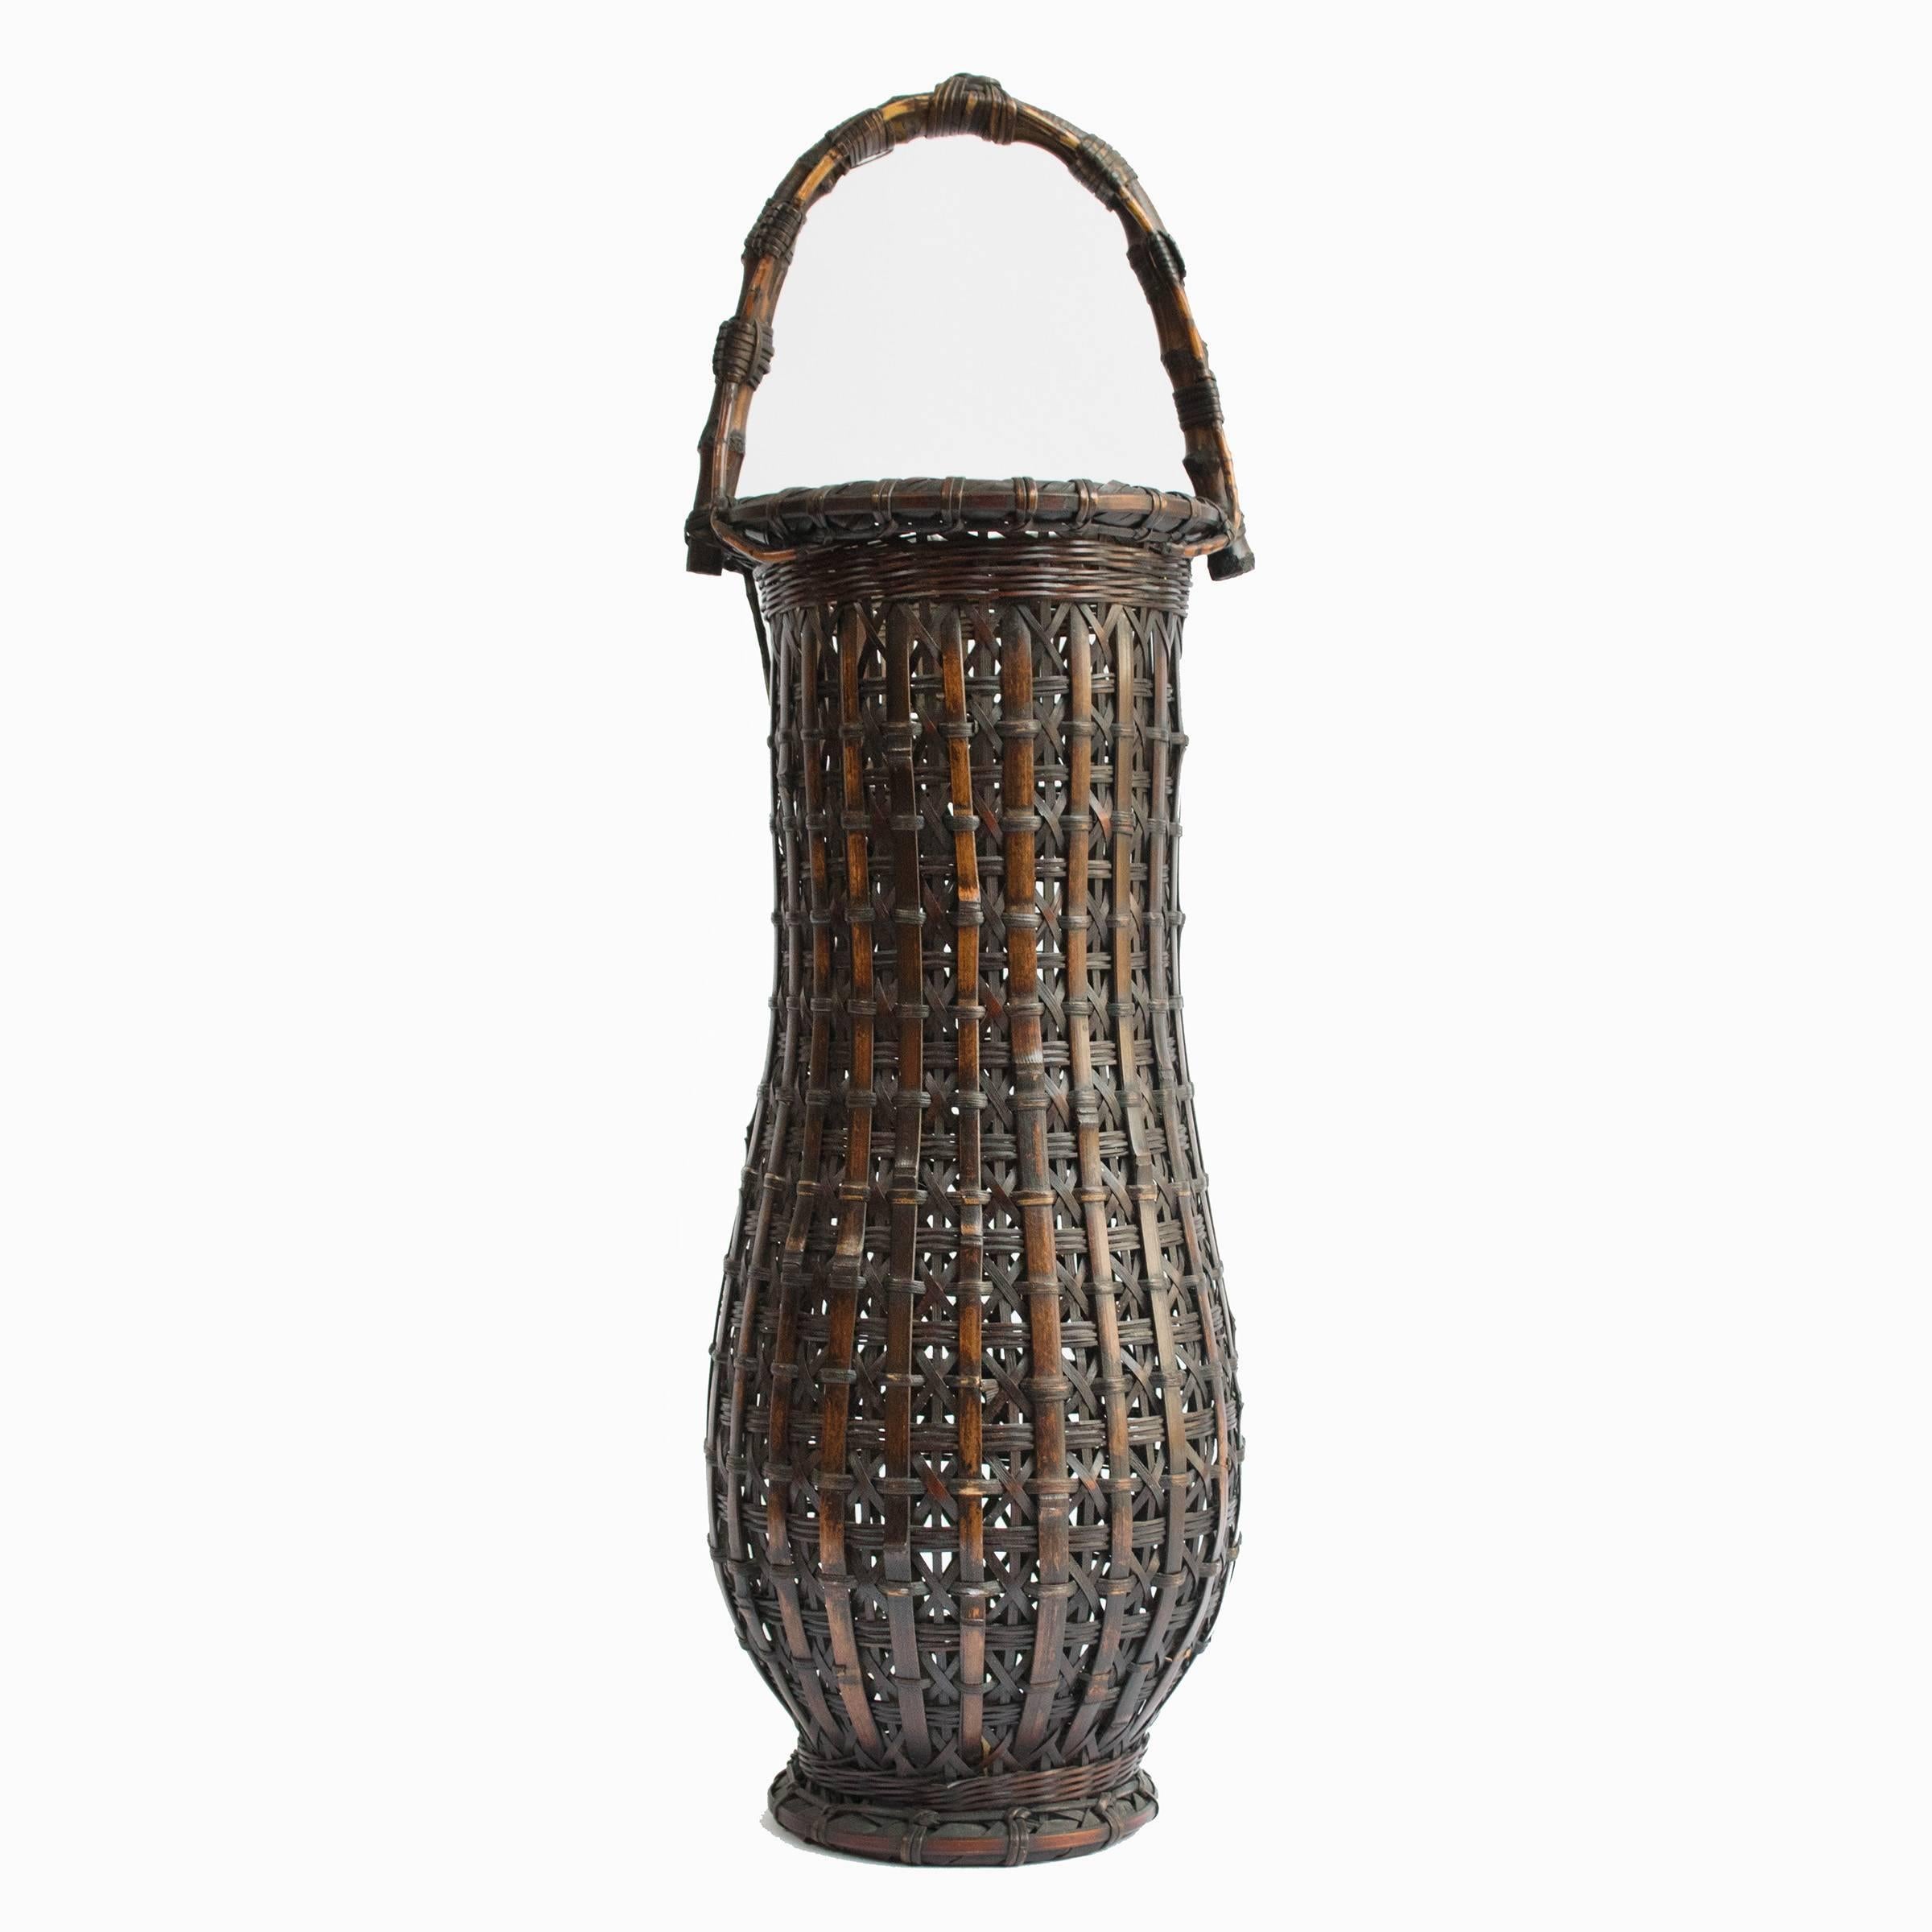 This one-of-a-kind bamboo basket was designed to hold ikebana: a very special Japanese flower arrangement. Looking at the detail of the weave at the very top of the handle, which resembles a knot, indicates that the artisan who made this basket was